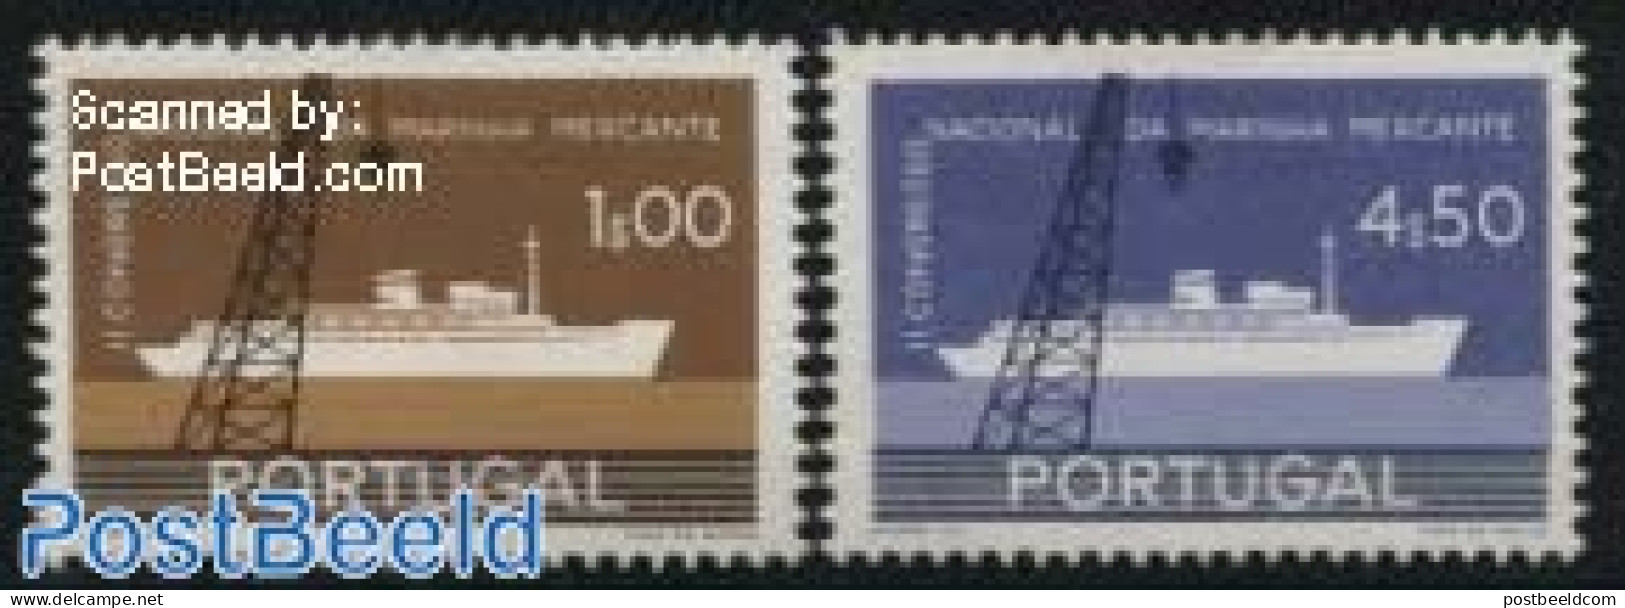 Portugal 1958 Commercial Fleet Congress 2v, Mint NH, Transport - Ships And Boats - Nuovi